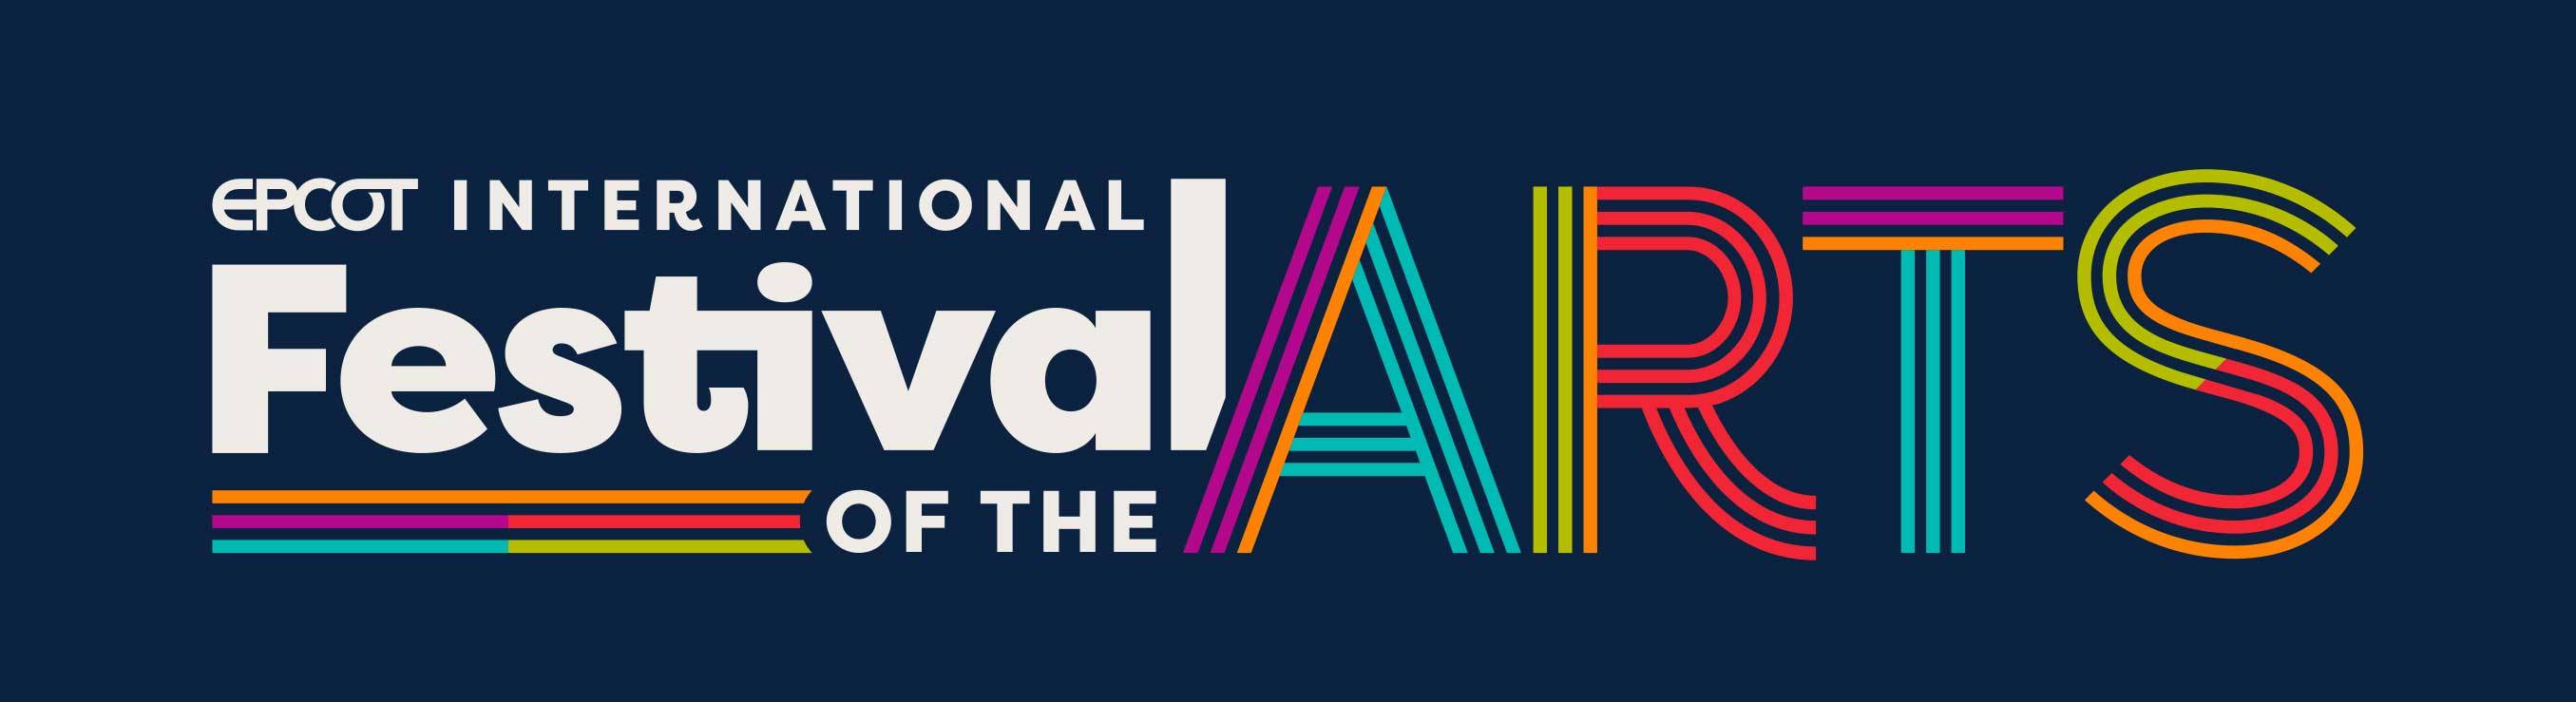 A look at the new 2022 EPCOT International Festival of the Arts logo and guide map